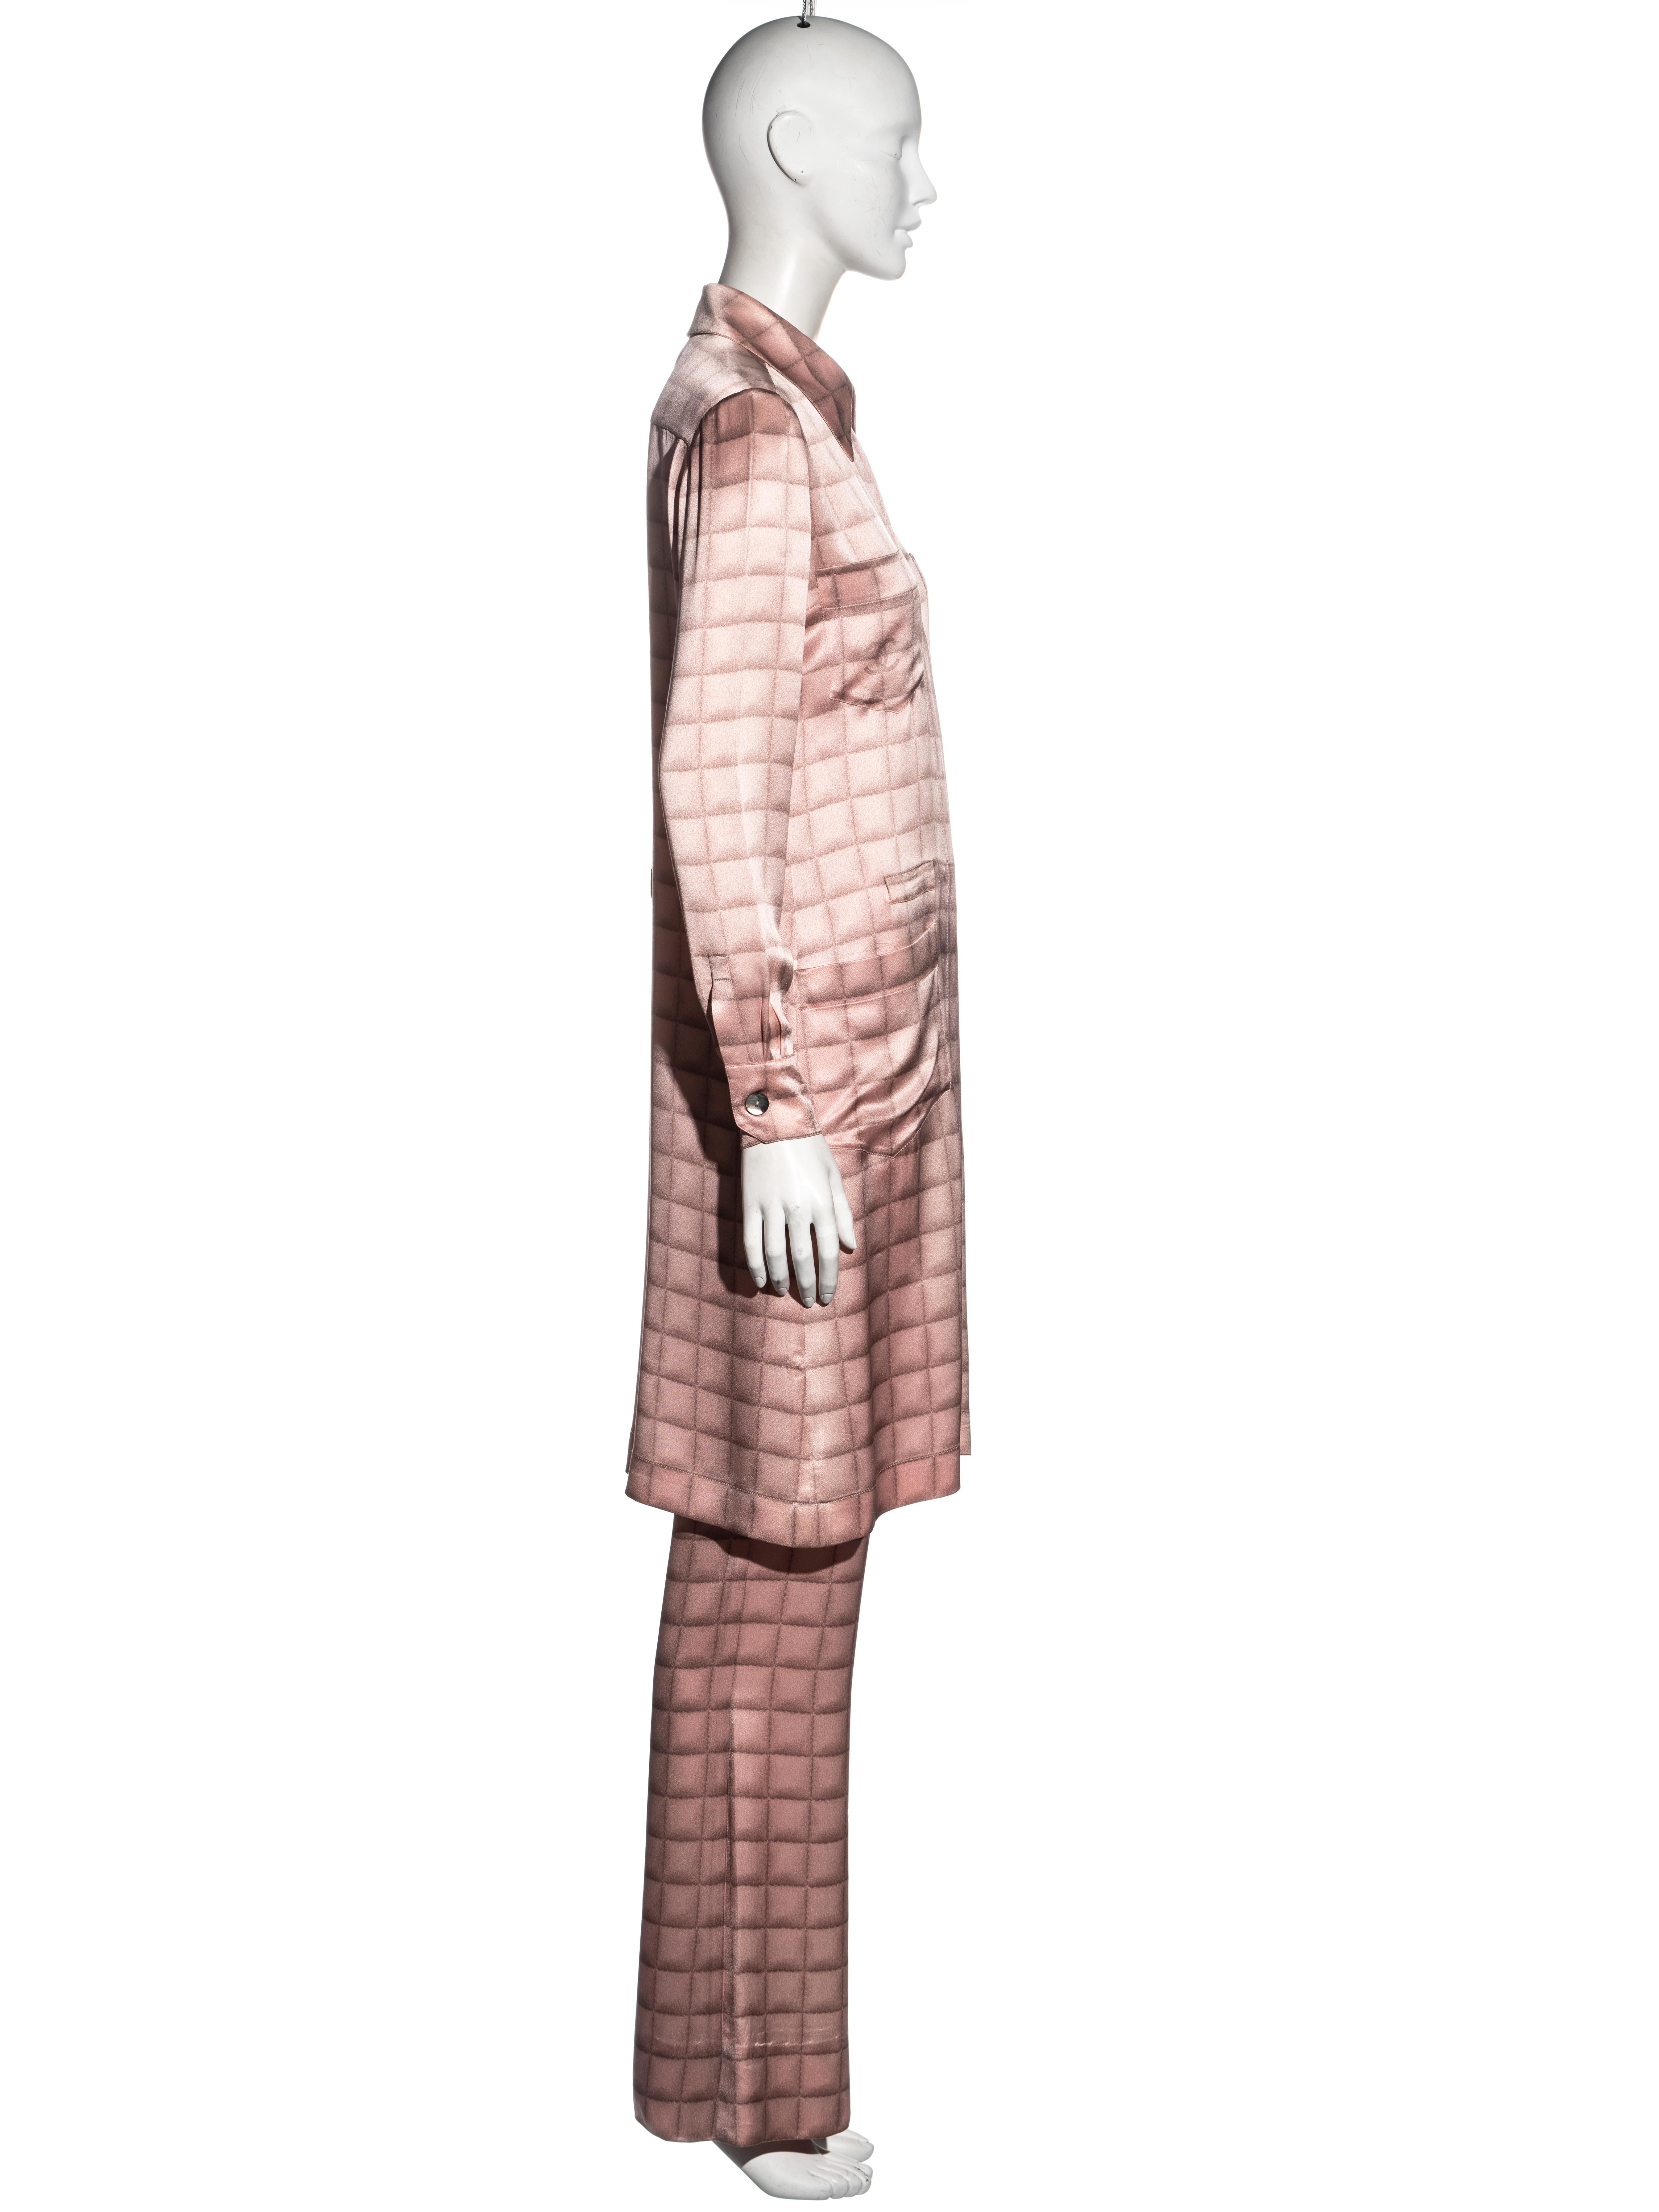 Chanel by Karl Lagerfeld pink silk shirt dress and pants suit, fw 2000 1